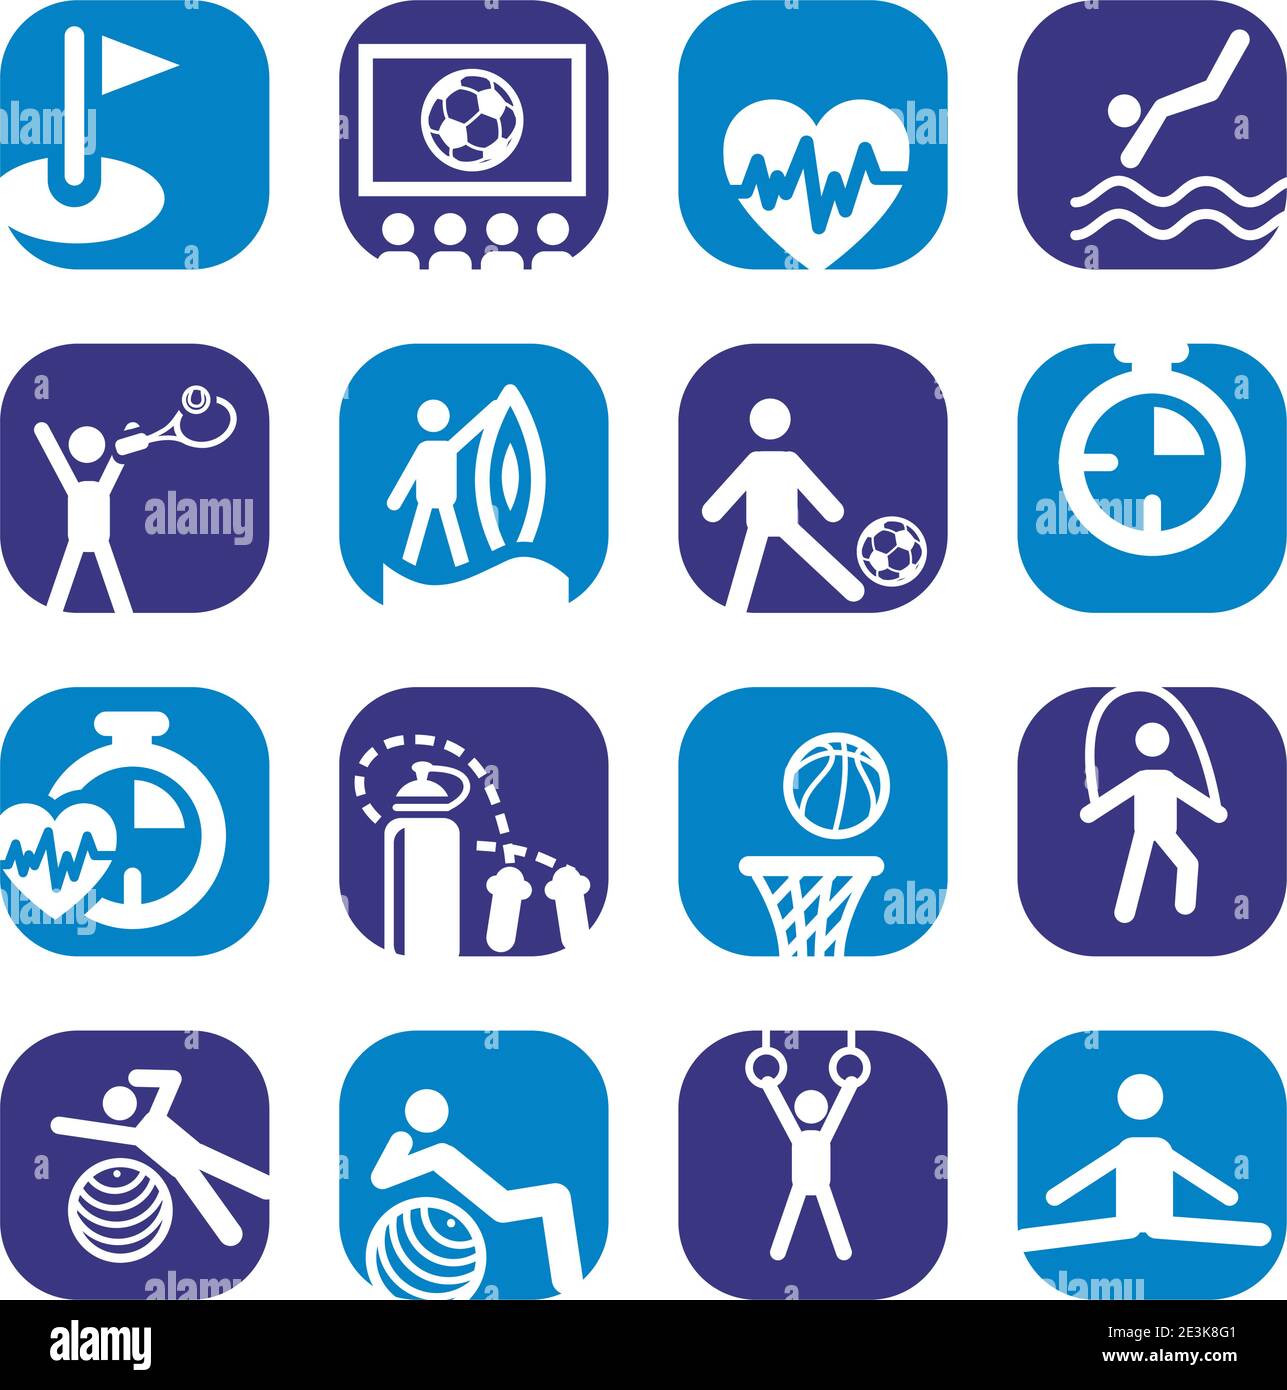 Elegant Colorful Fitness Icons Set Created For Mobile, Web And Applications. Stock Vector